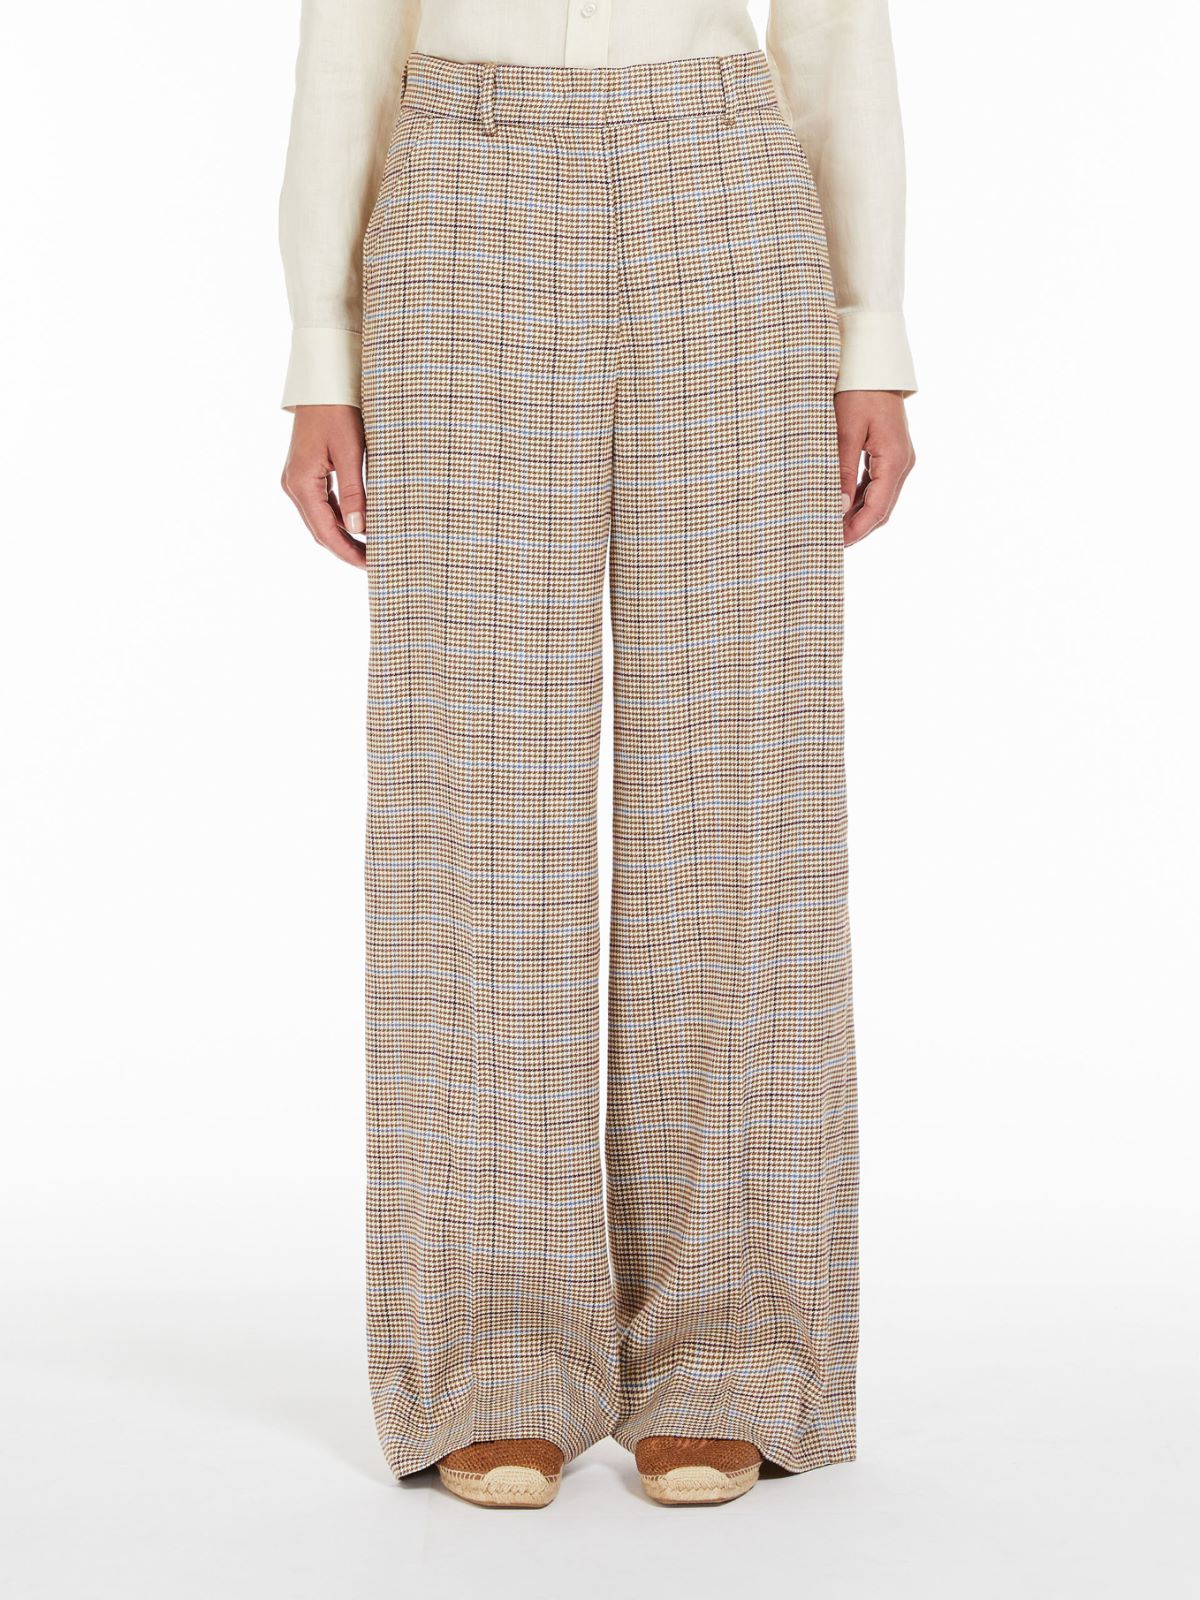 Linen and cotton twill trousers, terra cotta | Weekend Max Mara